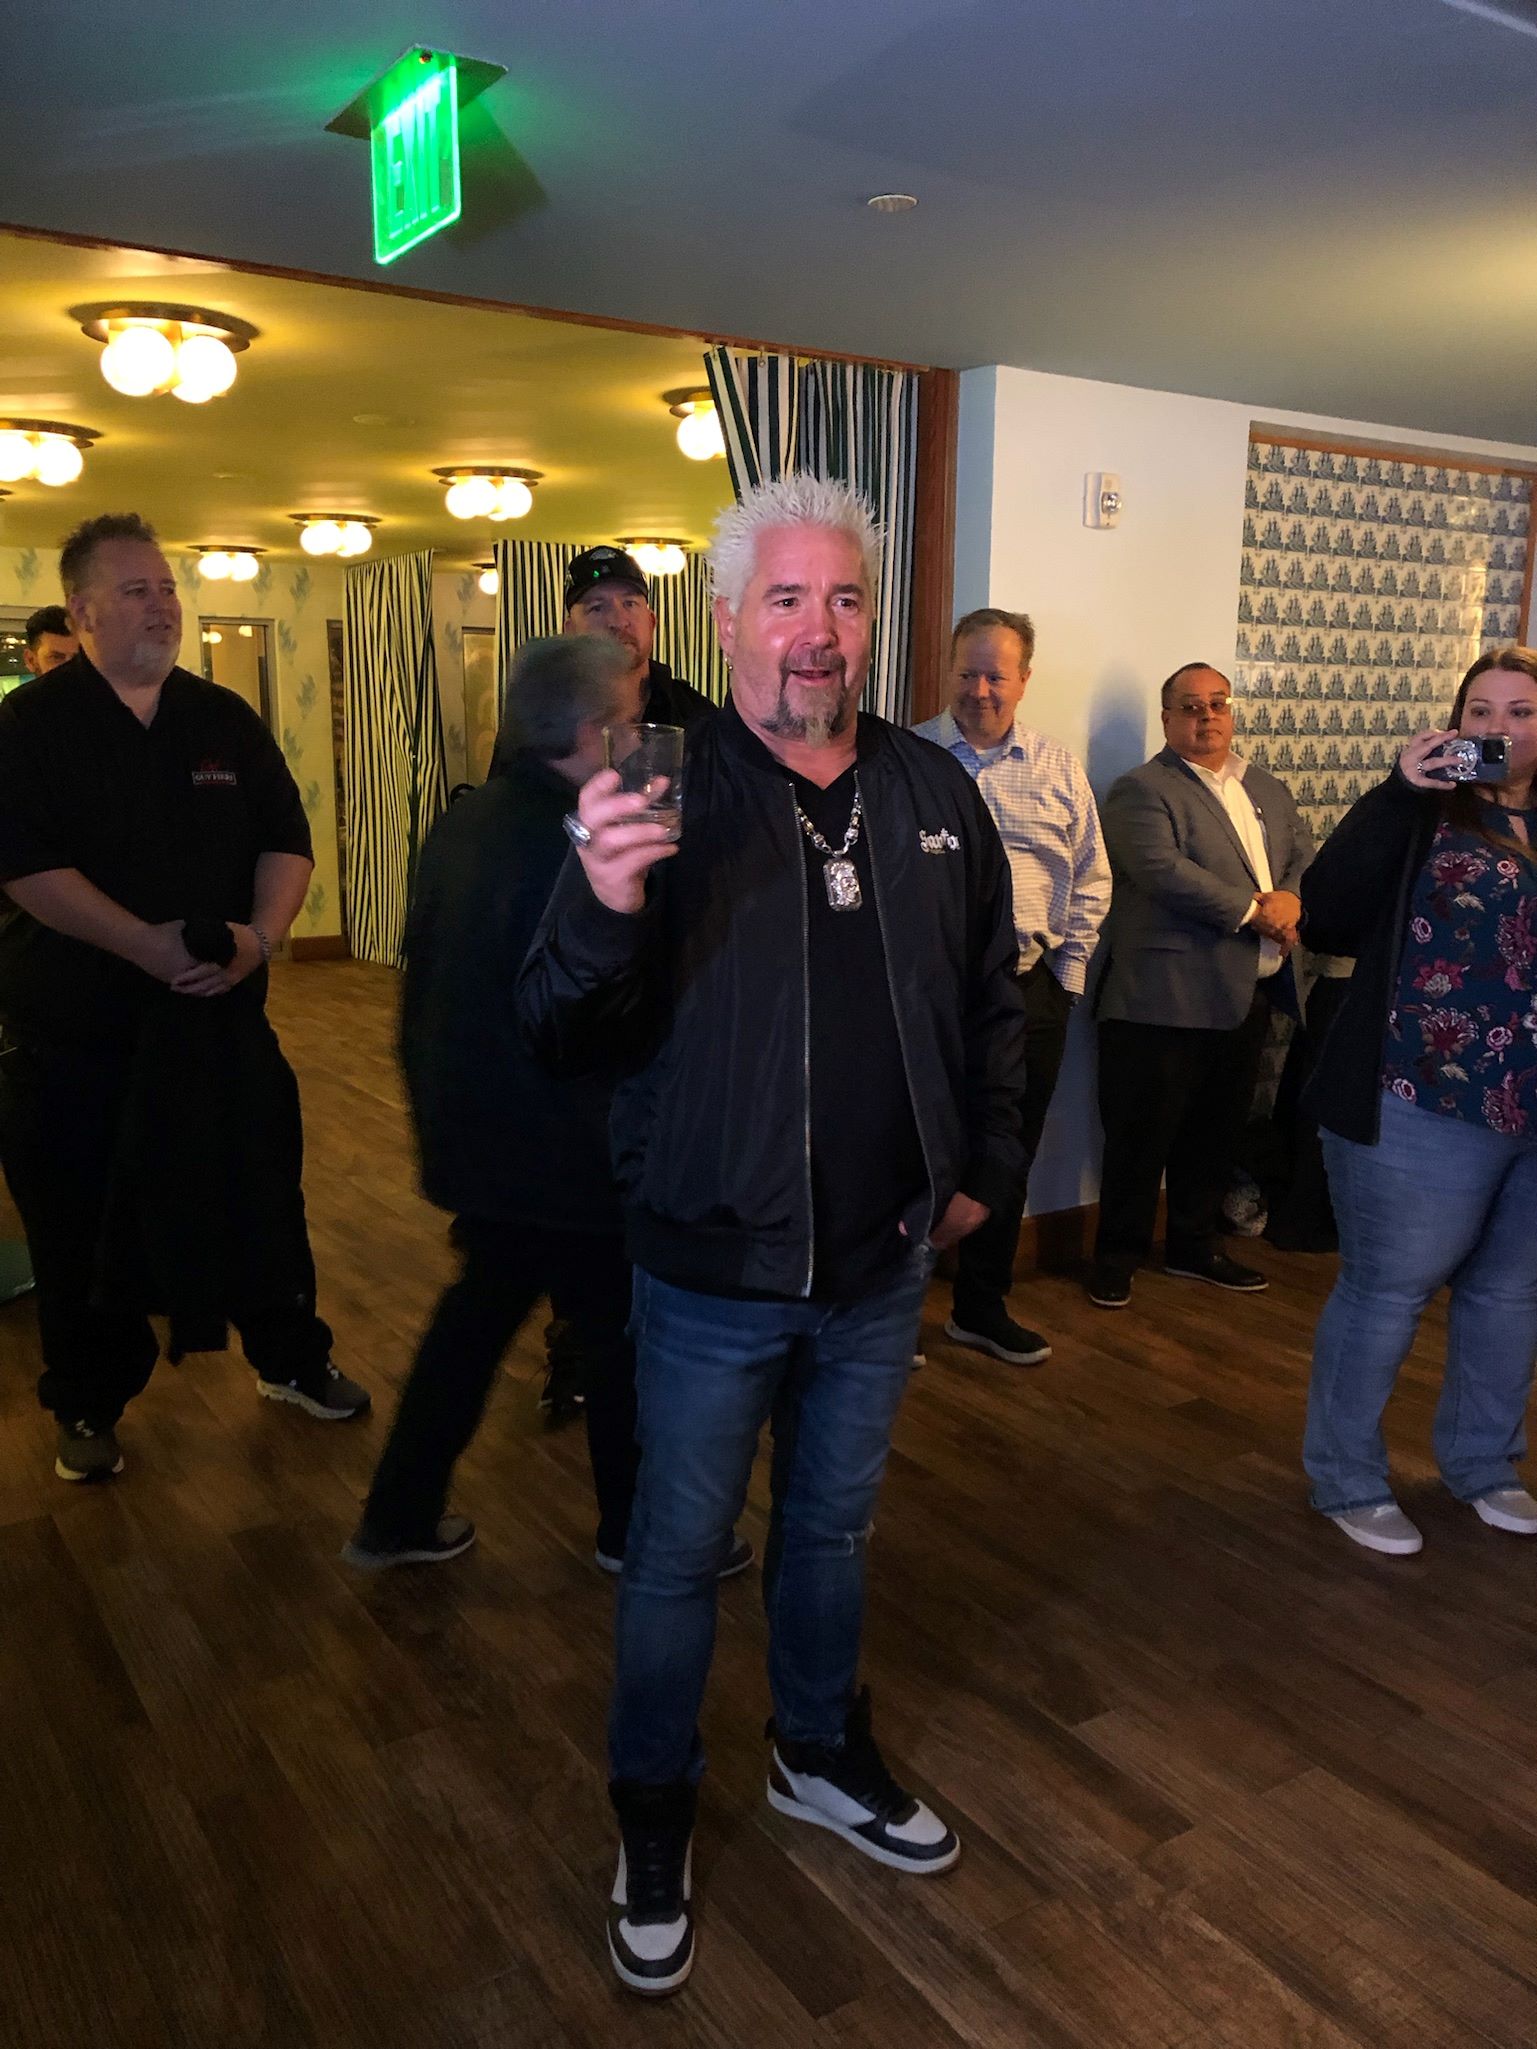 An image of Guy Fieri from the Santo Tequila tasting at SALT Restaurant & Bar.